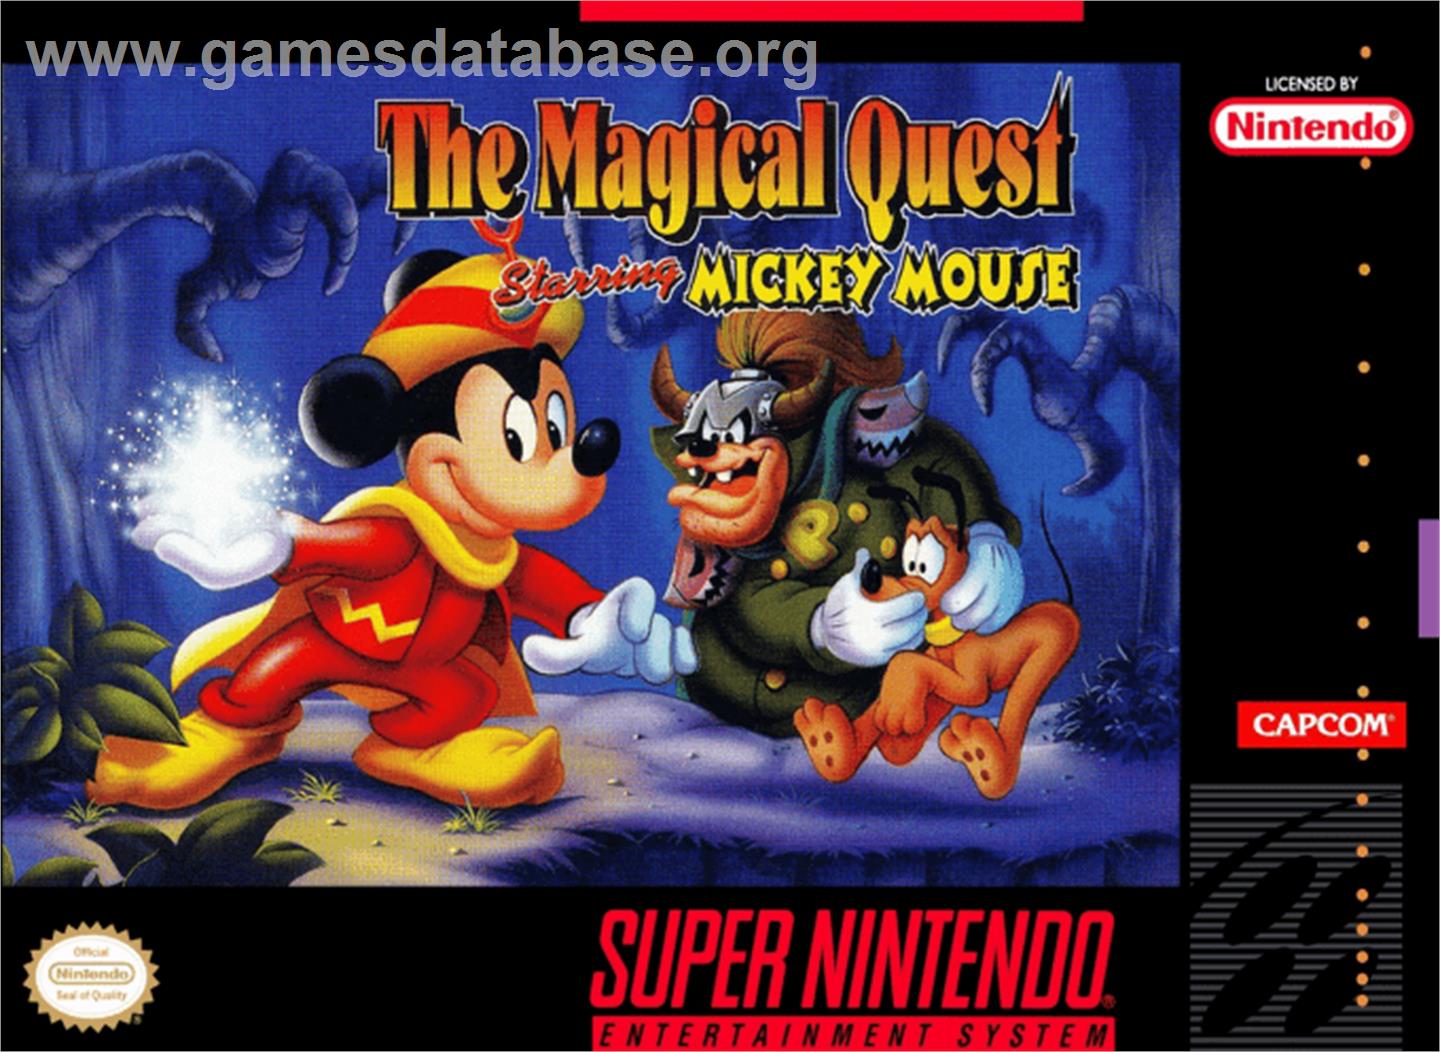 Disney's Magical Quest Starring Mickey Mouse - Nintendo SNES - Artwork - Box